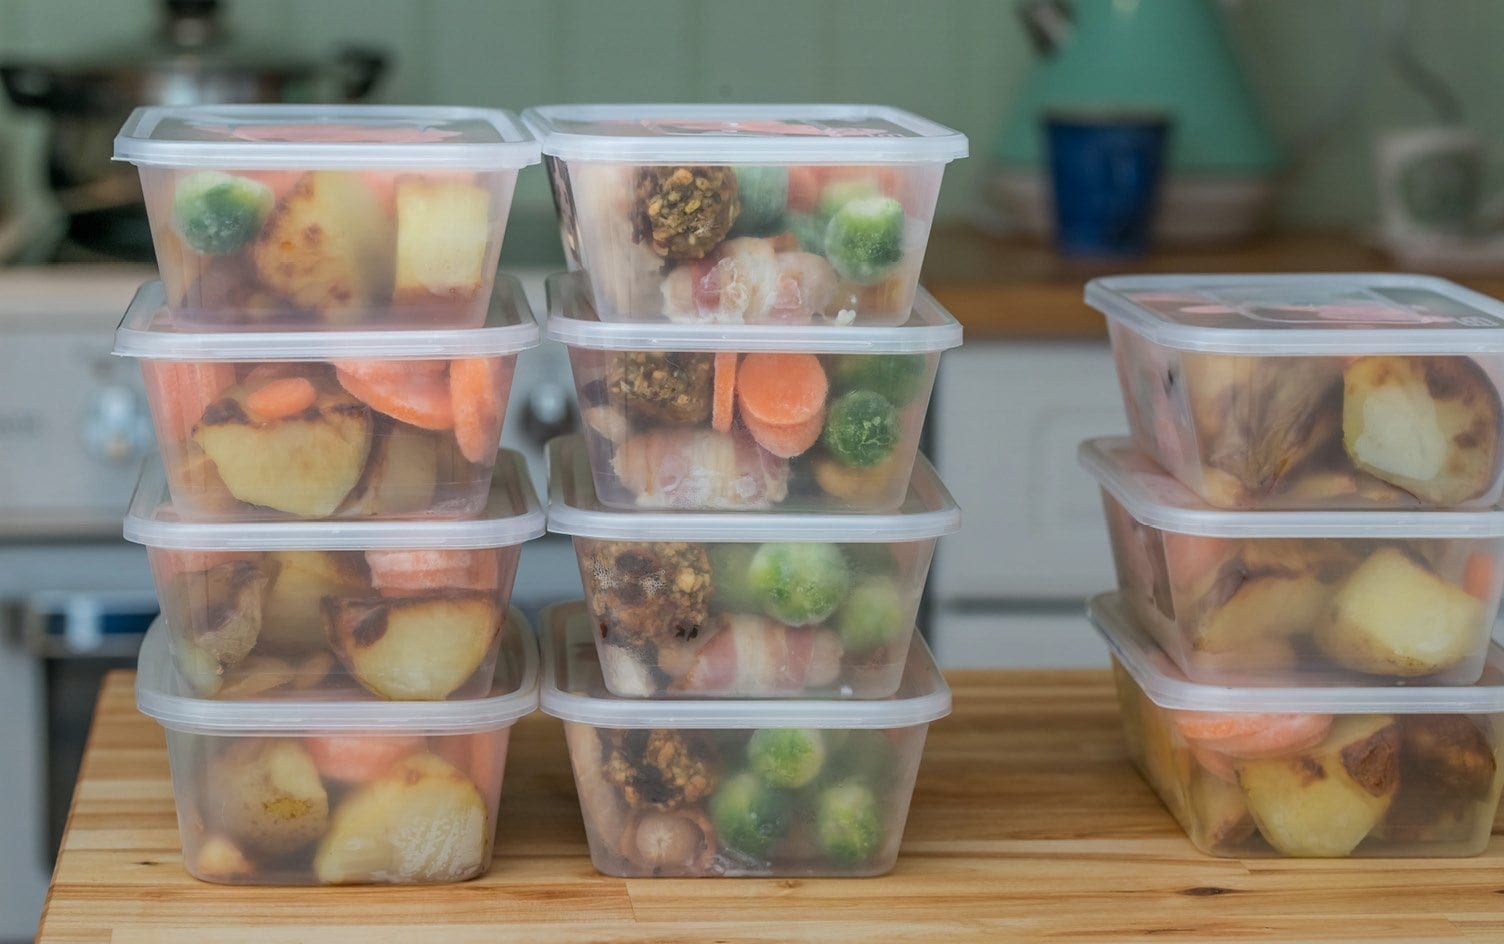 Meal Prep Containers Guide